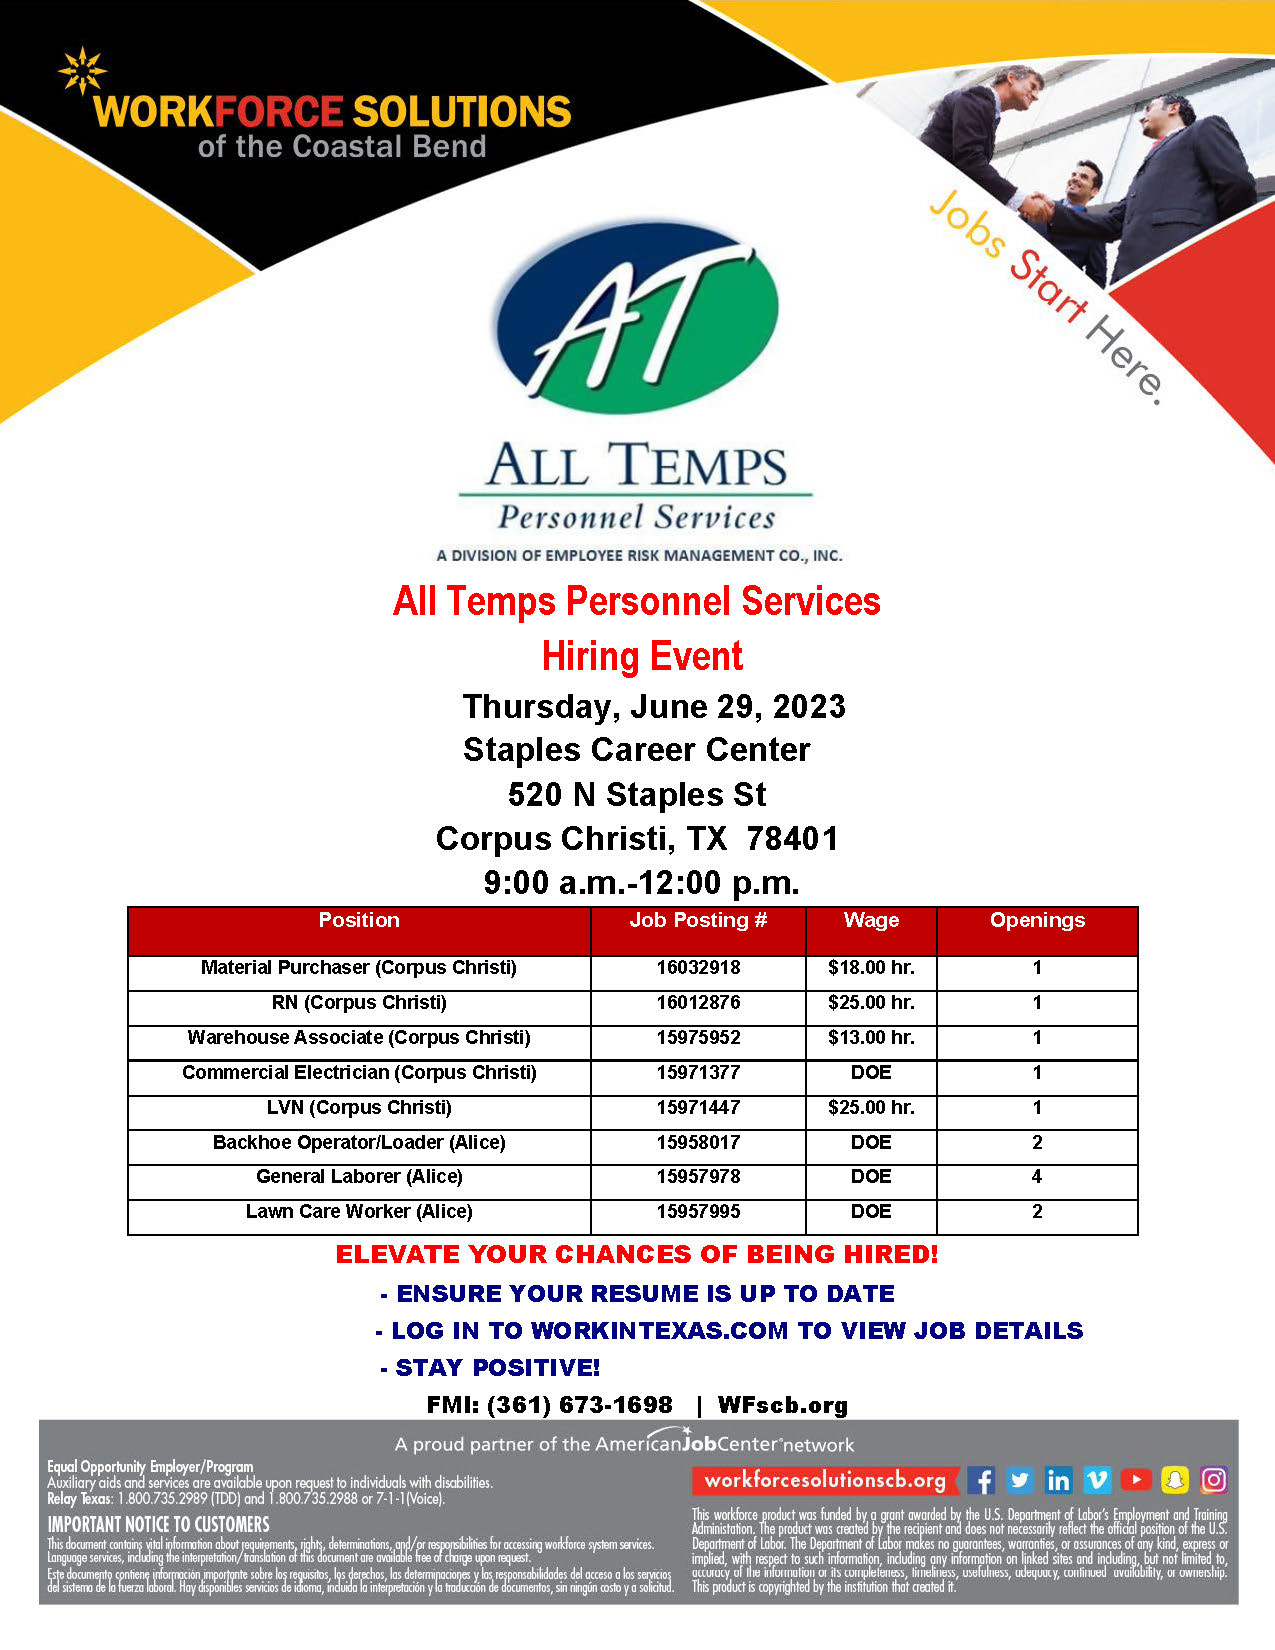 All Temps Personnel Services Hiring Event